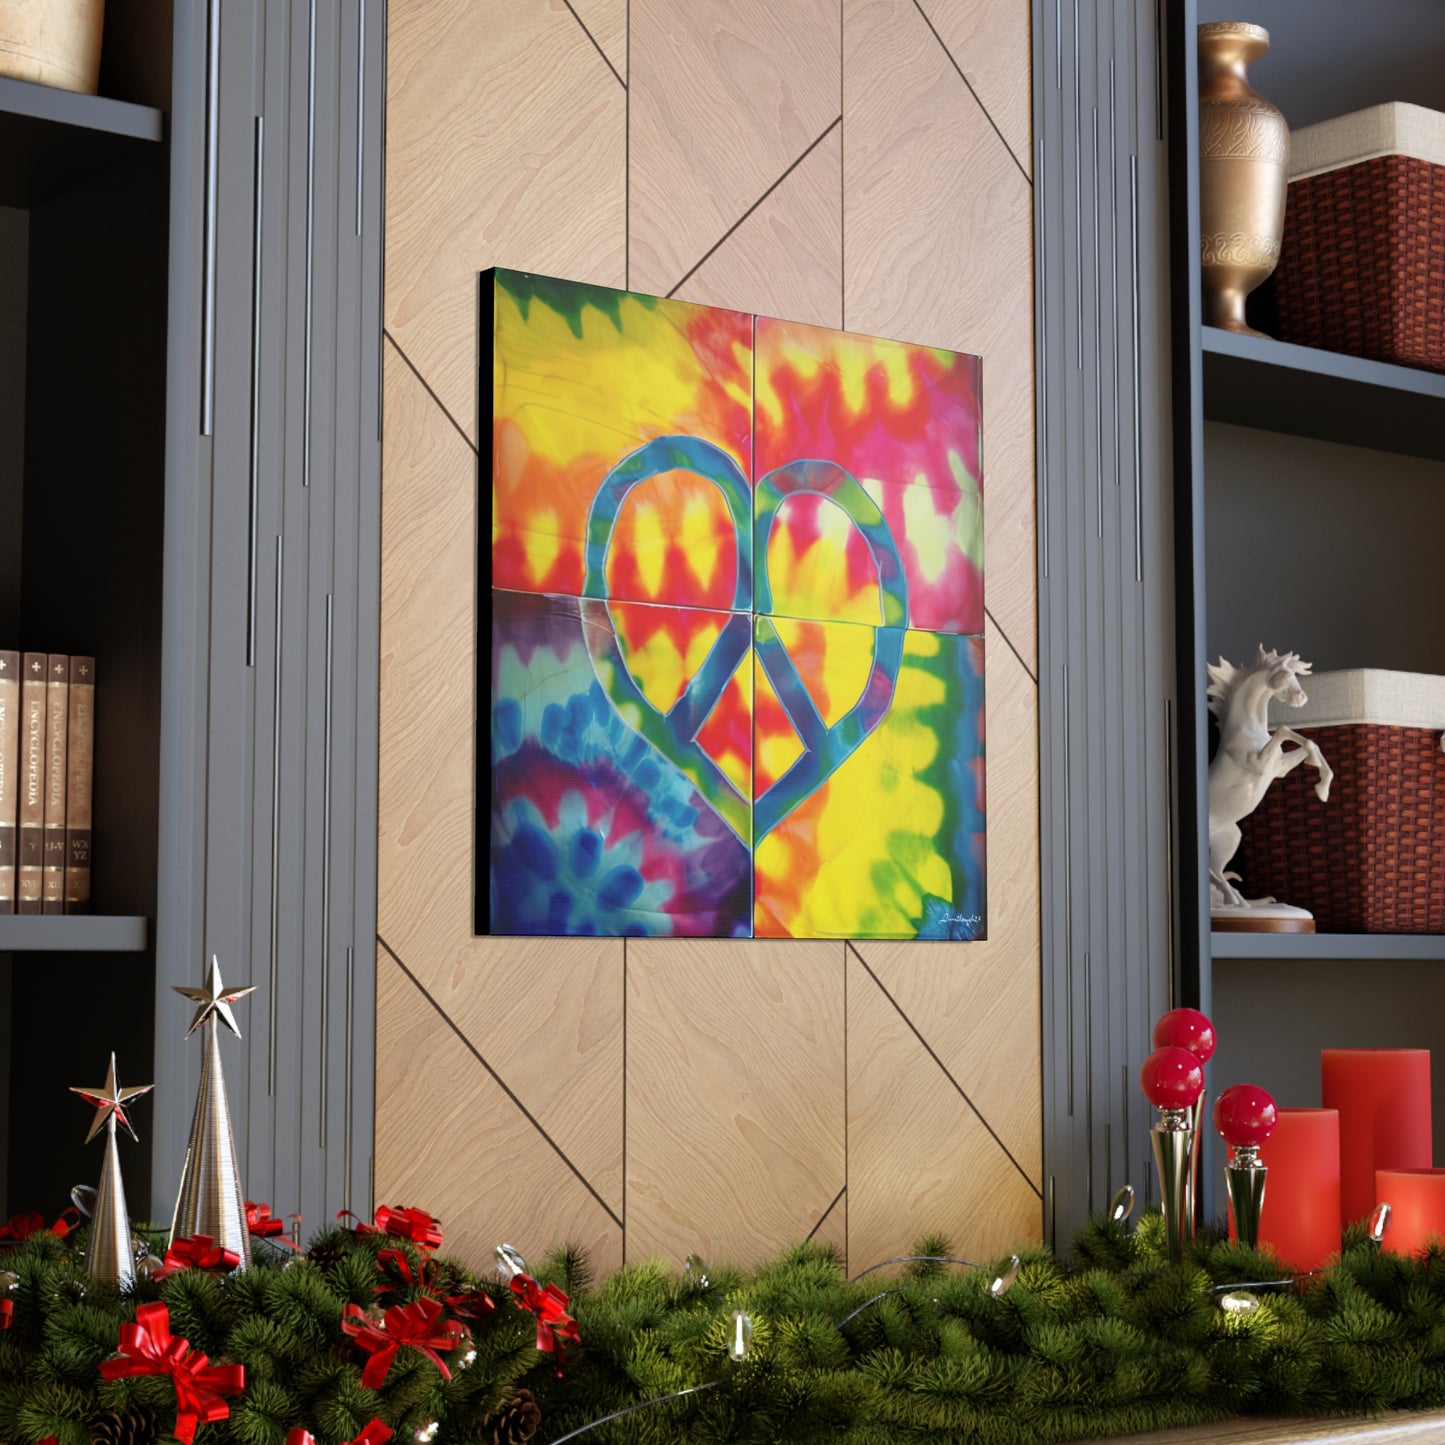 Coolio Tie Dye Hippie Heart Peace Sign Canvas Gallery Wraps